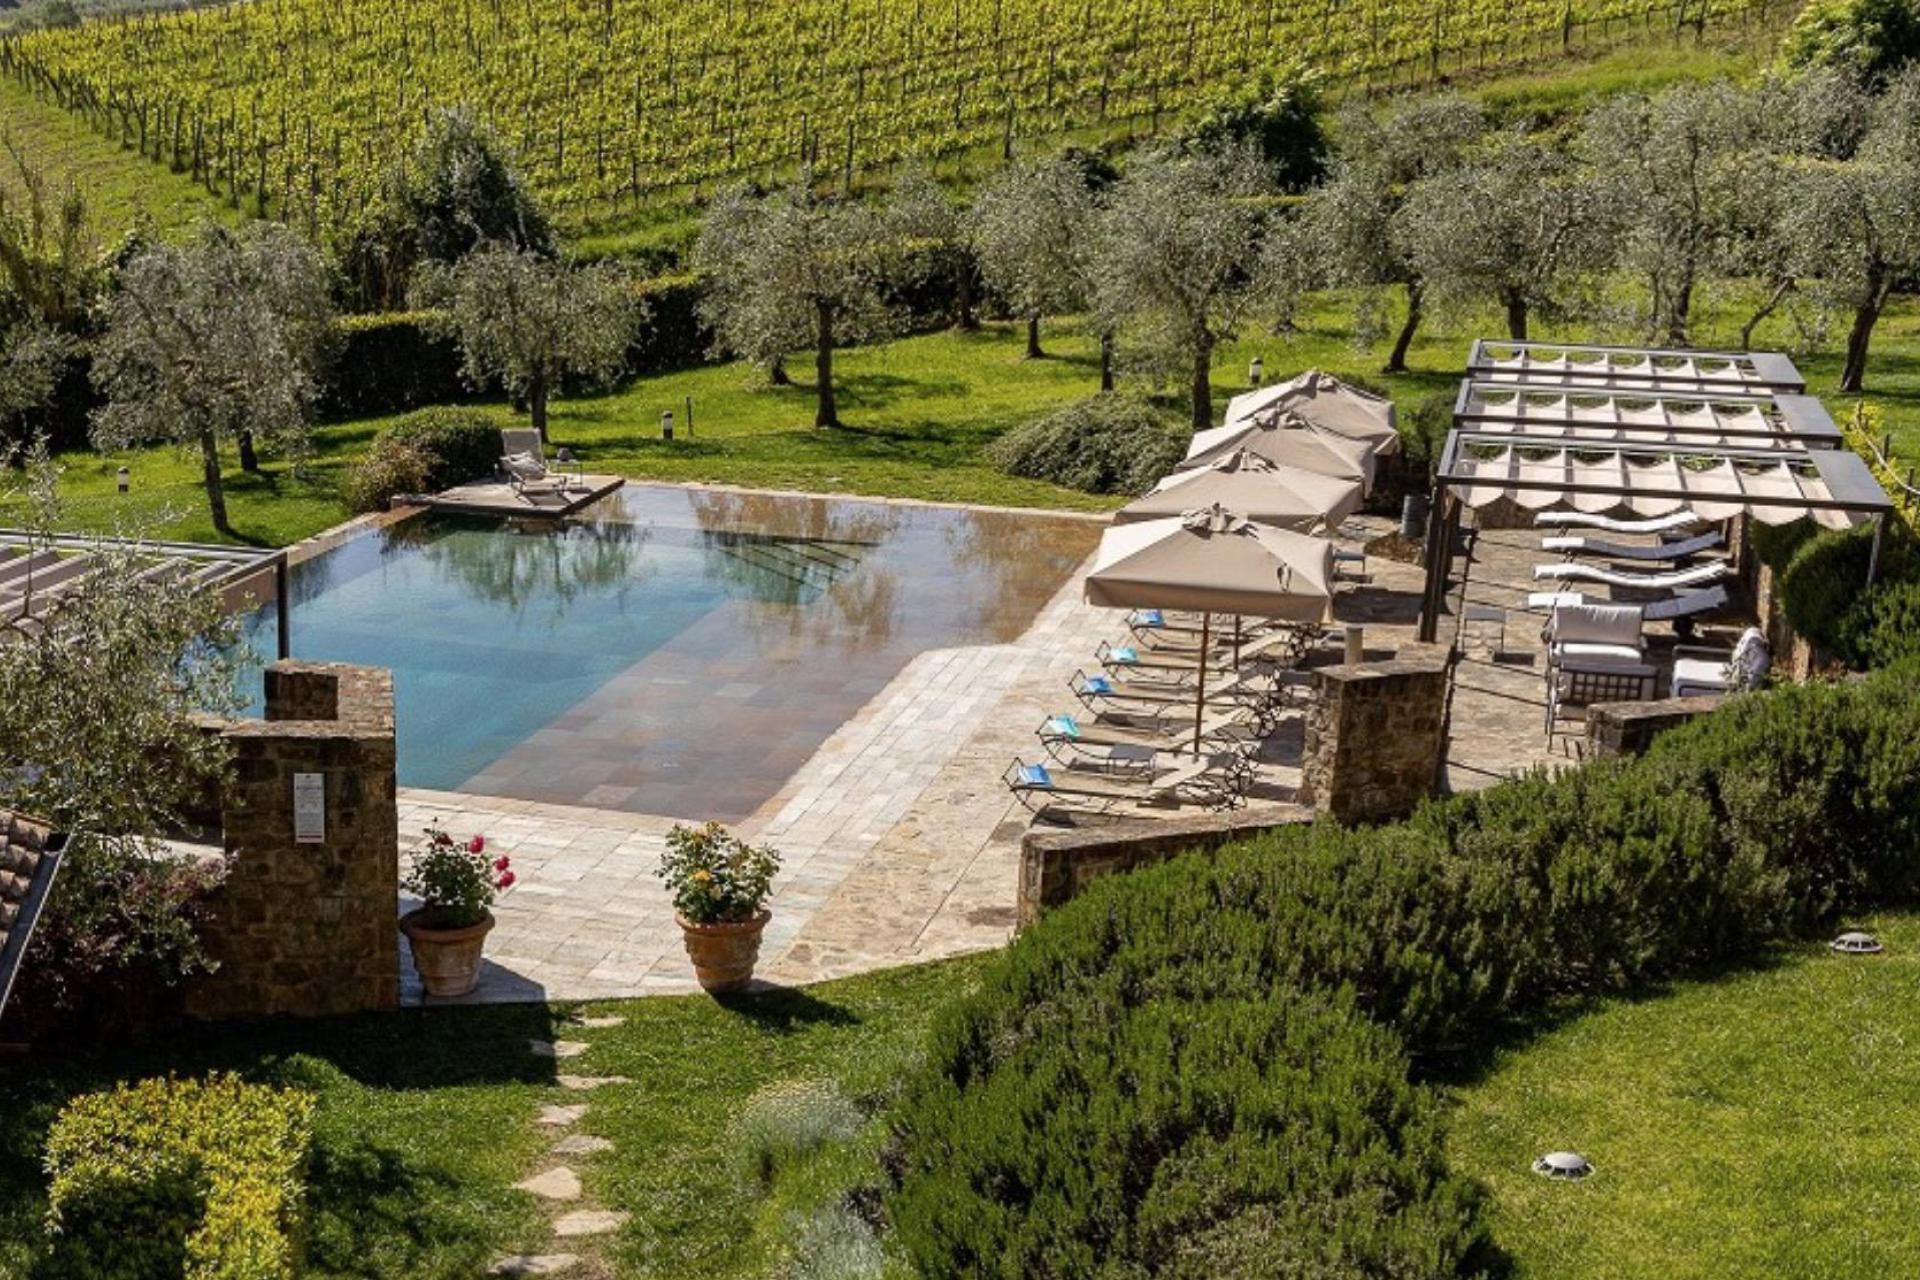 Luxury agriturismo amidst the vineyards of the Brunello